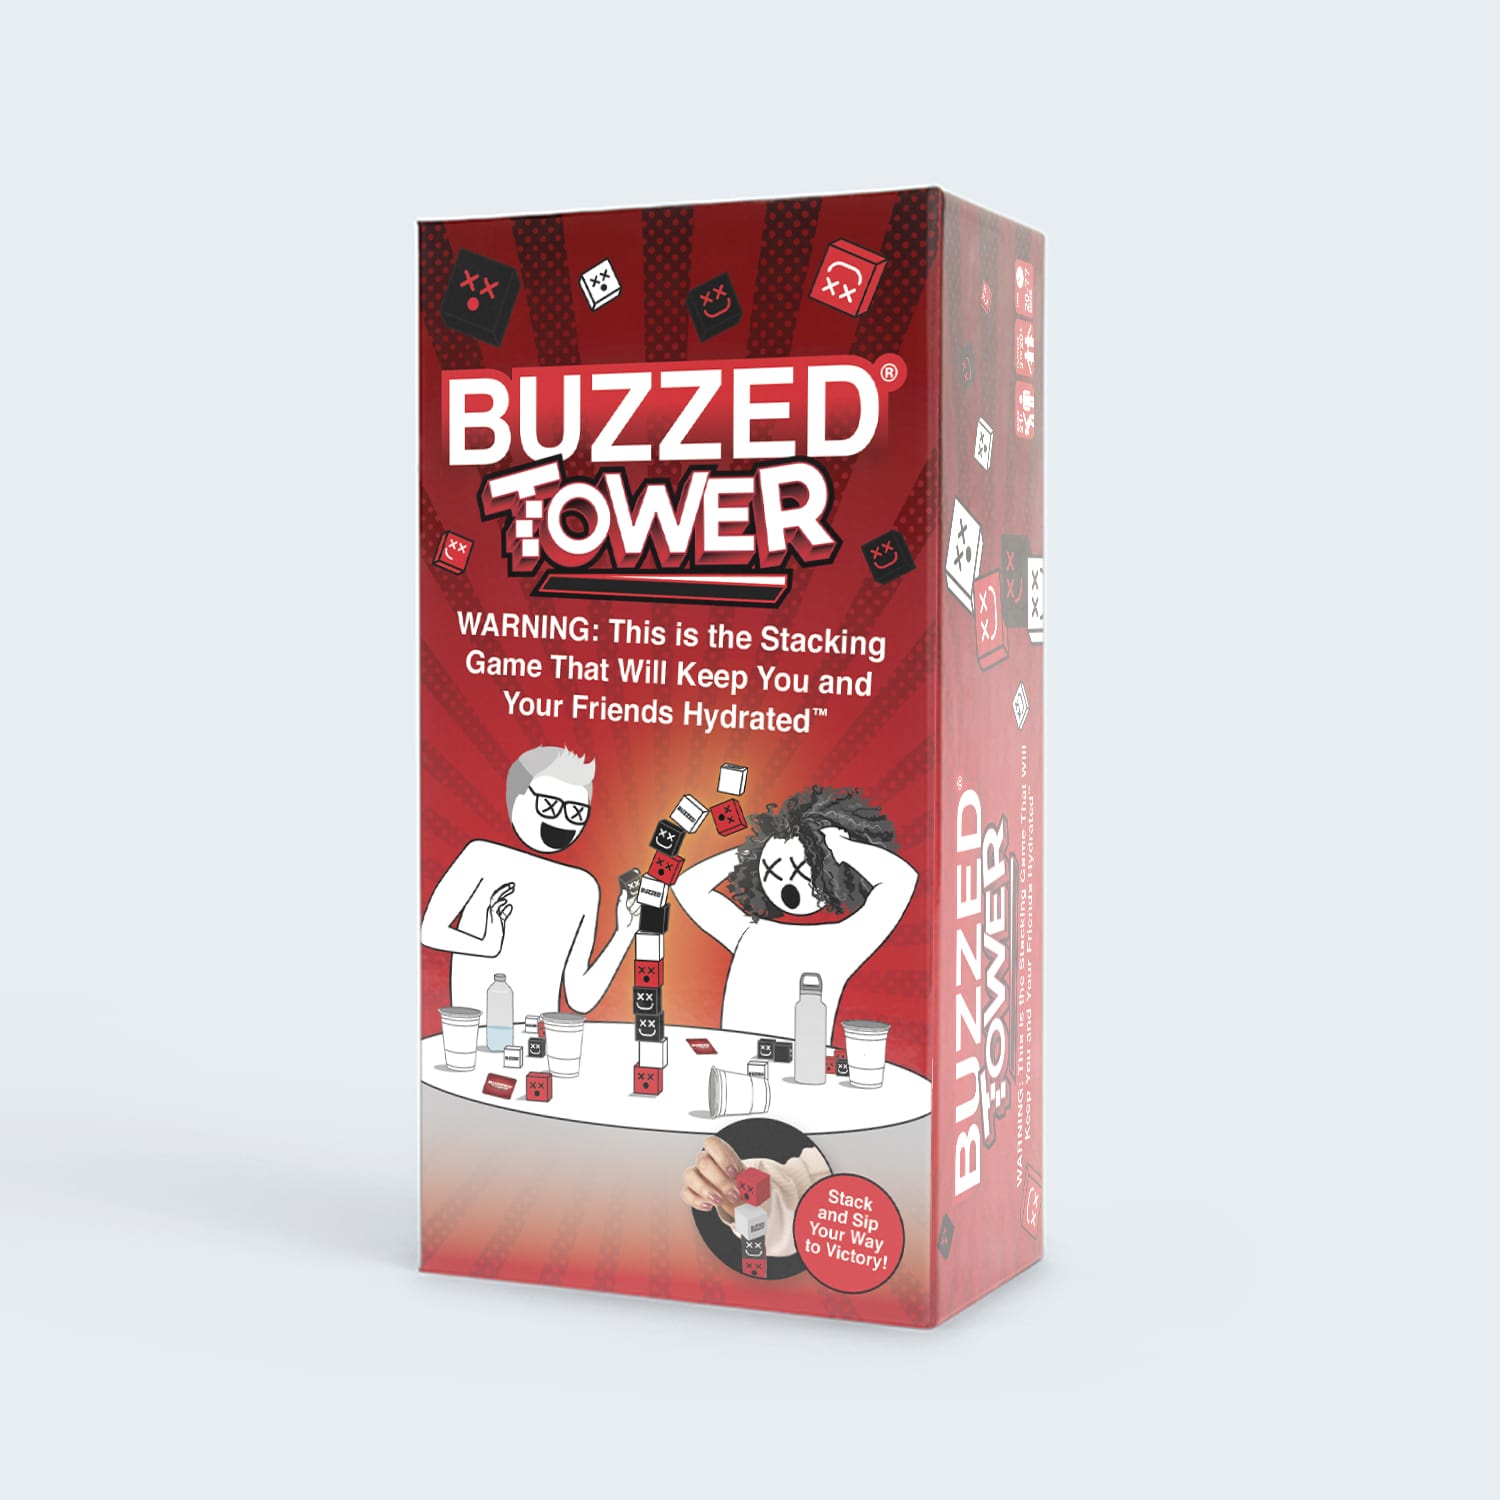 buzzed-tower-game-box-and-game-play-02-what-do-you-meme-by-relatable